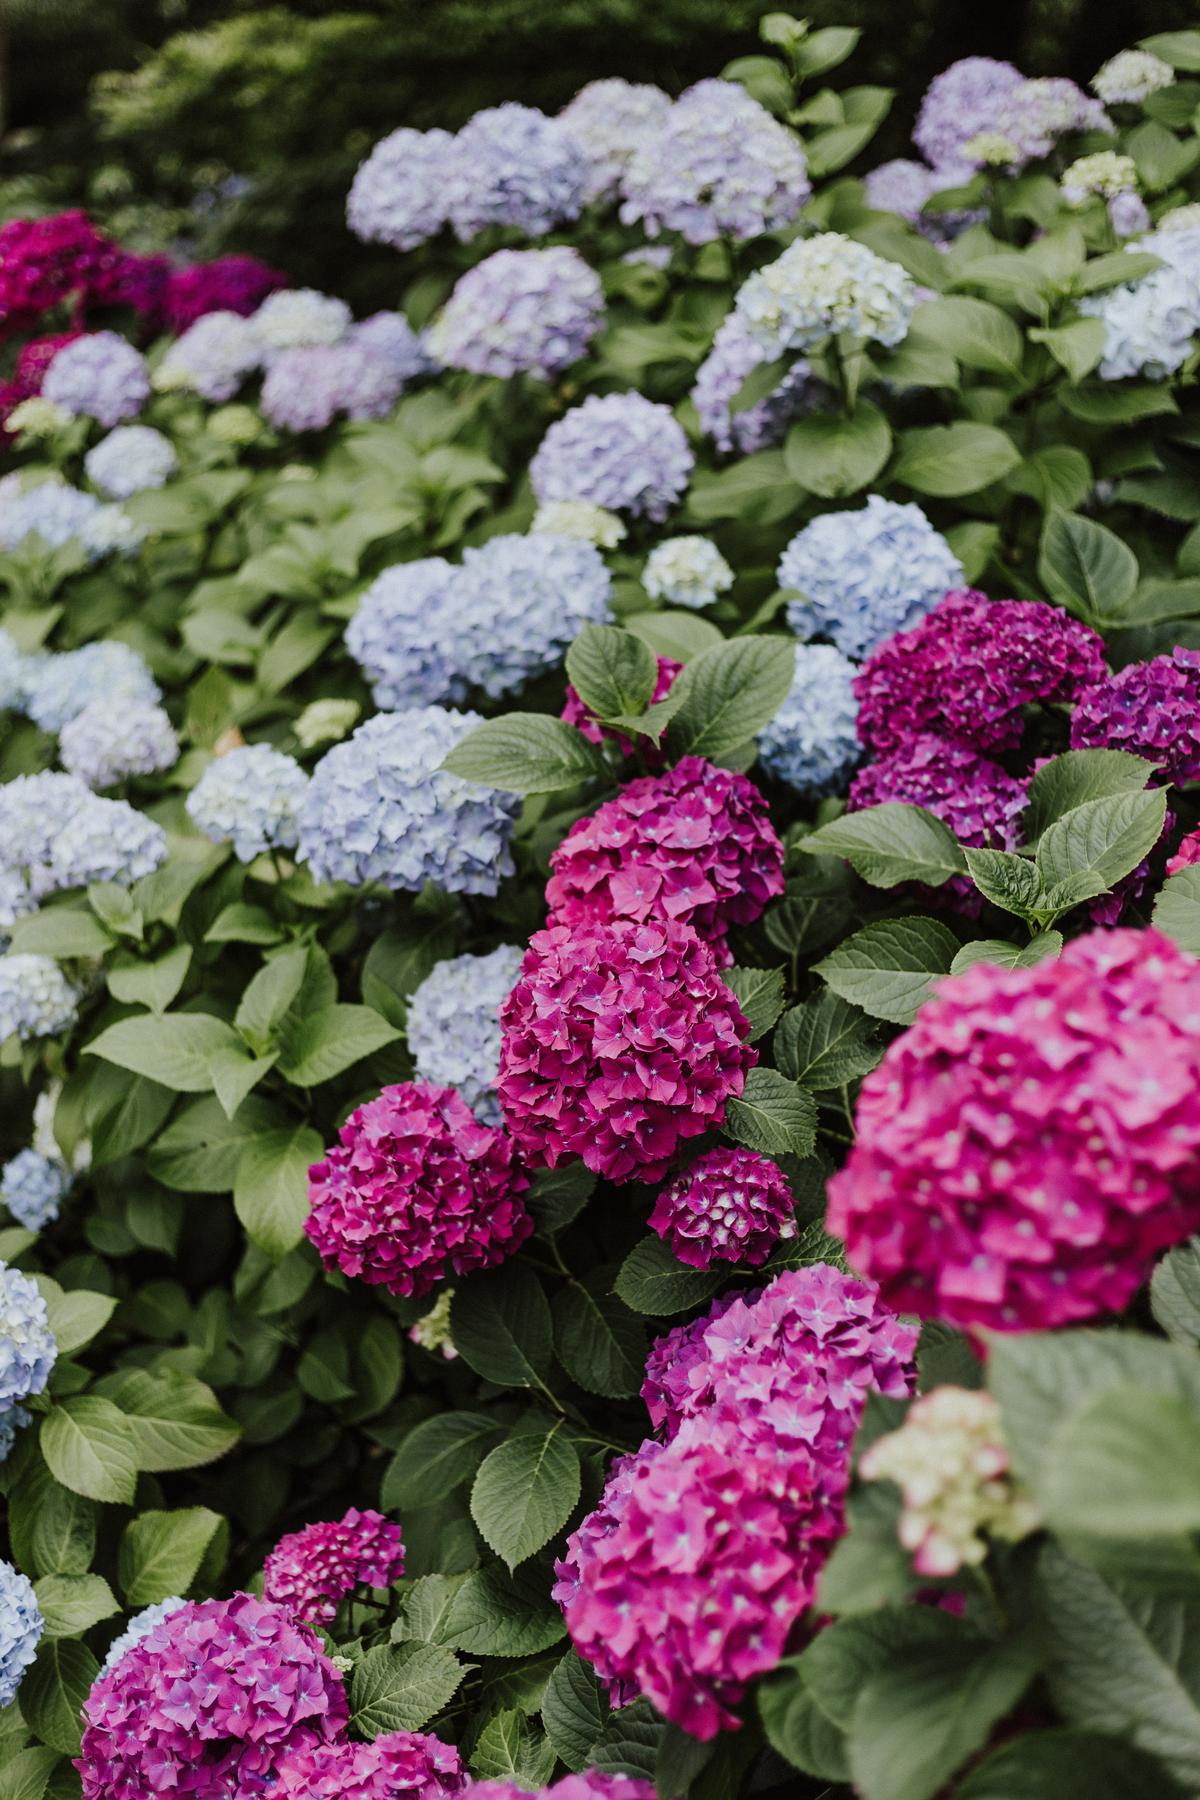 A beautiful image of pruned hydrangeas in a garden, showcasing various colors and blooms.